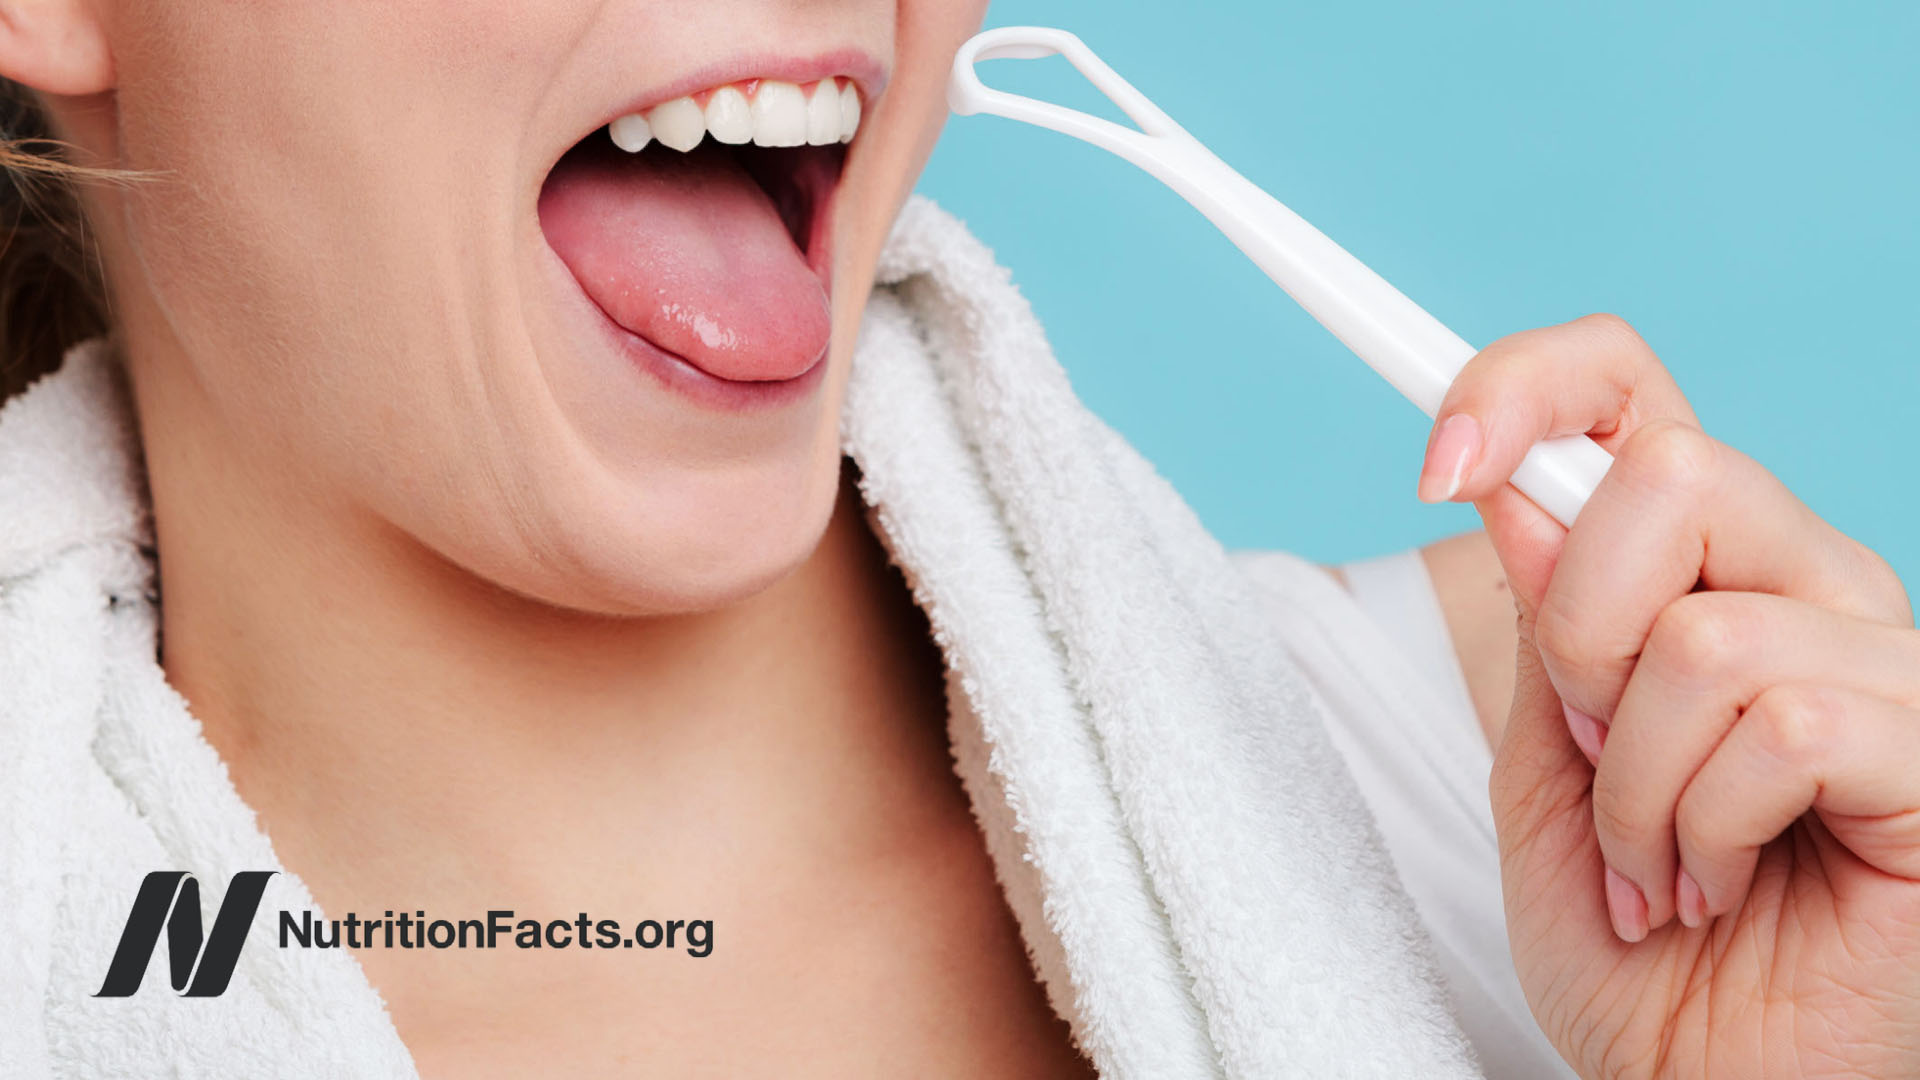 Tongue Scraping: Uses, Benefits, and Side Effects